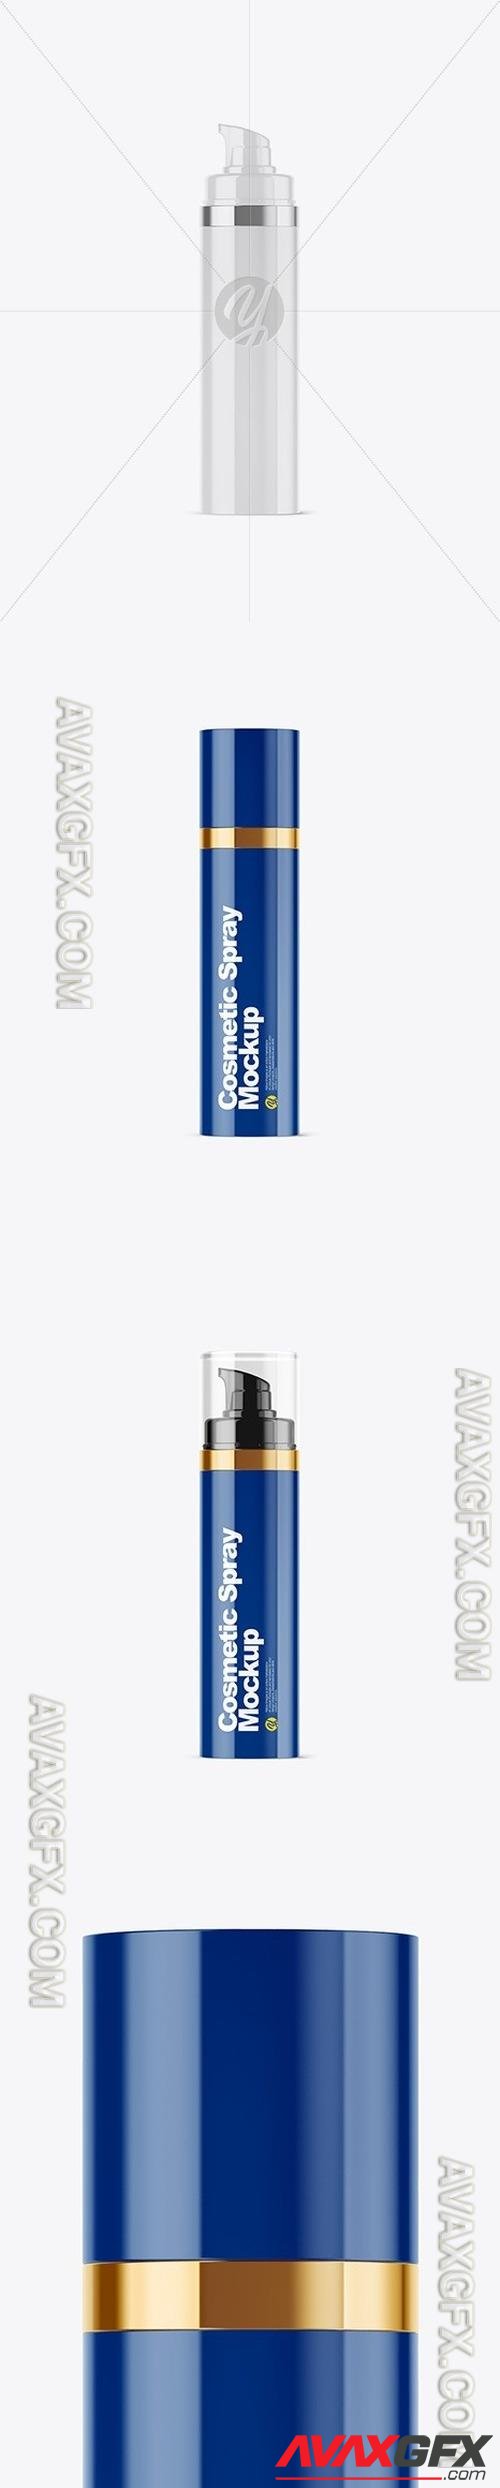 Glossy Bottle with Pump Mockup 50261